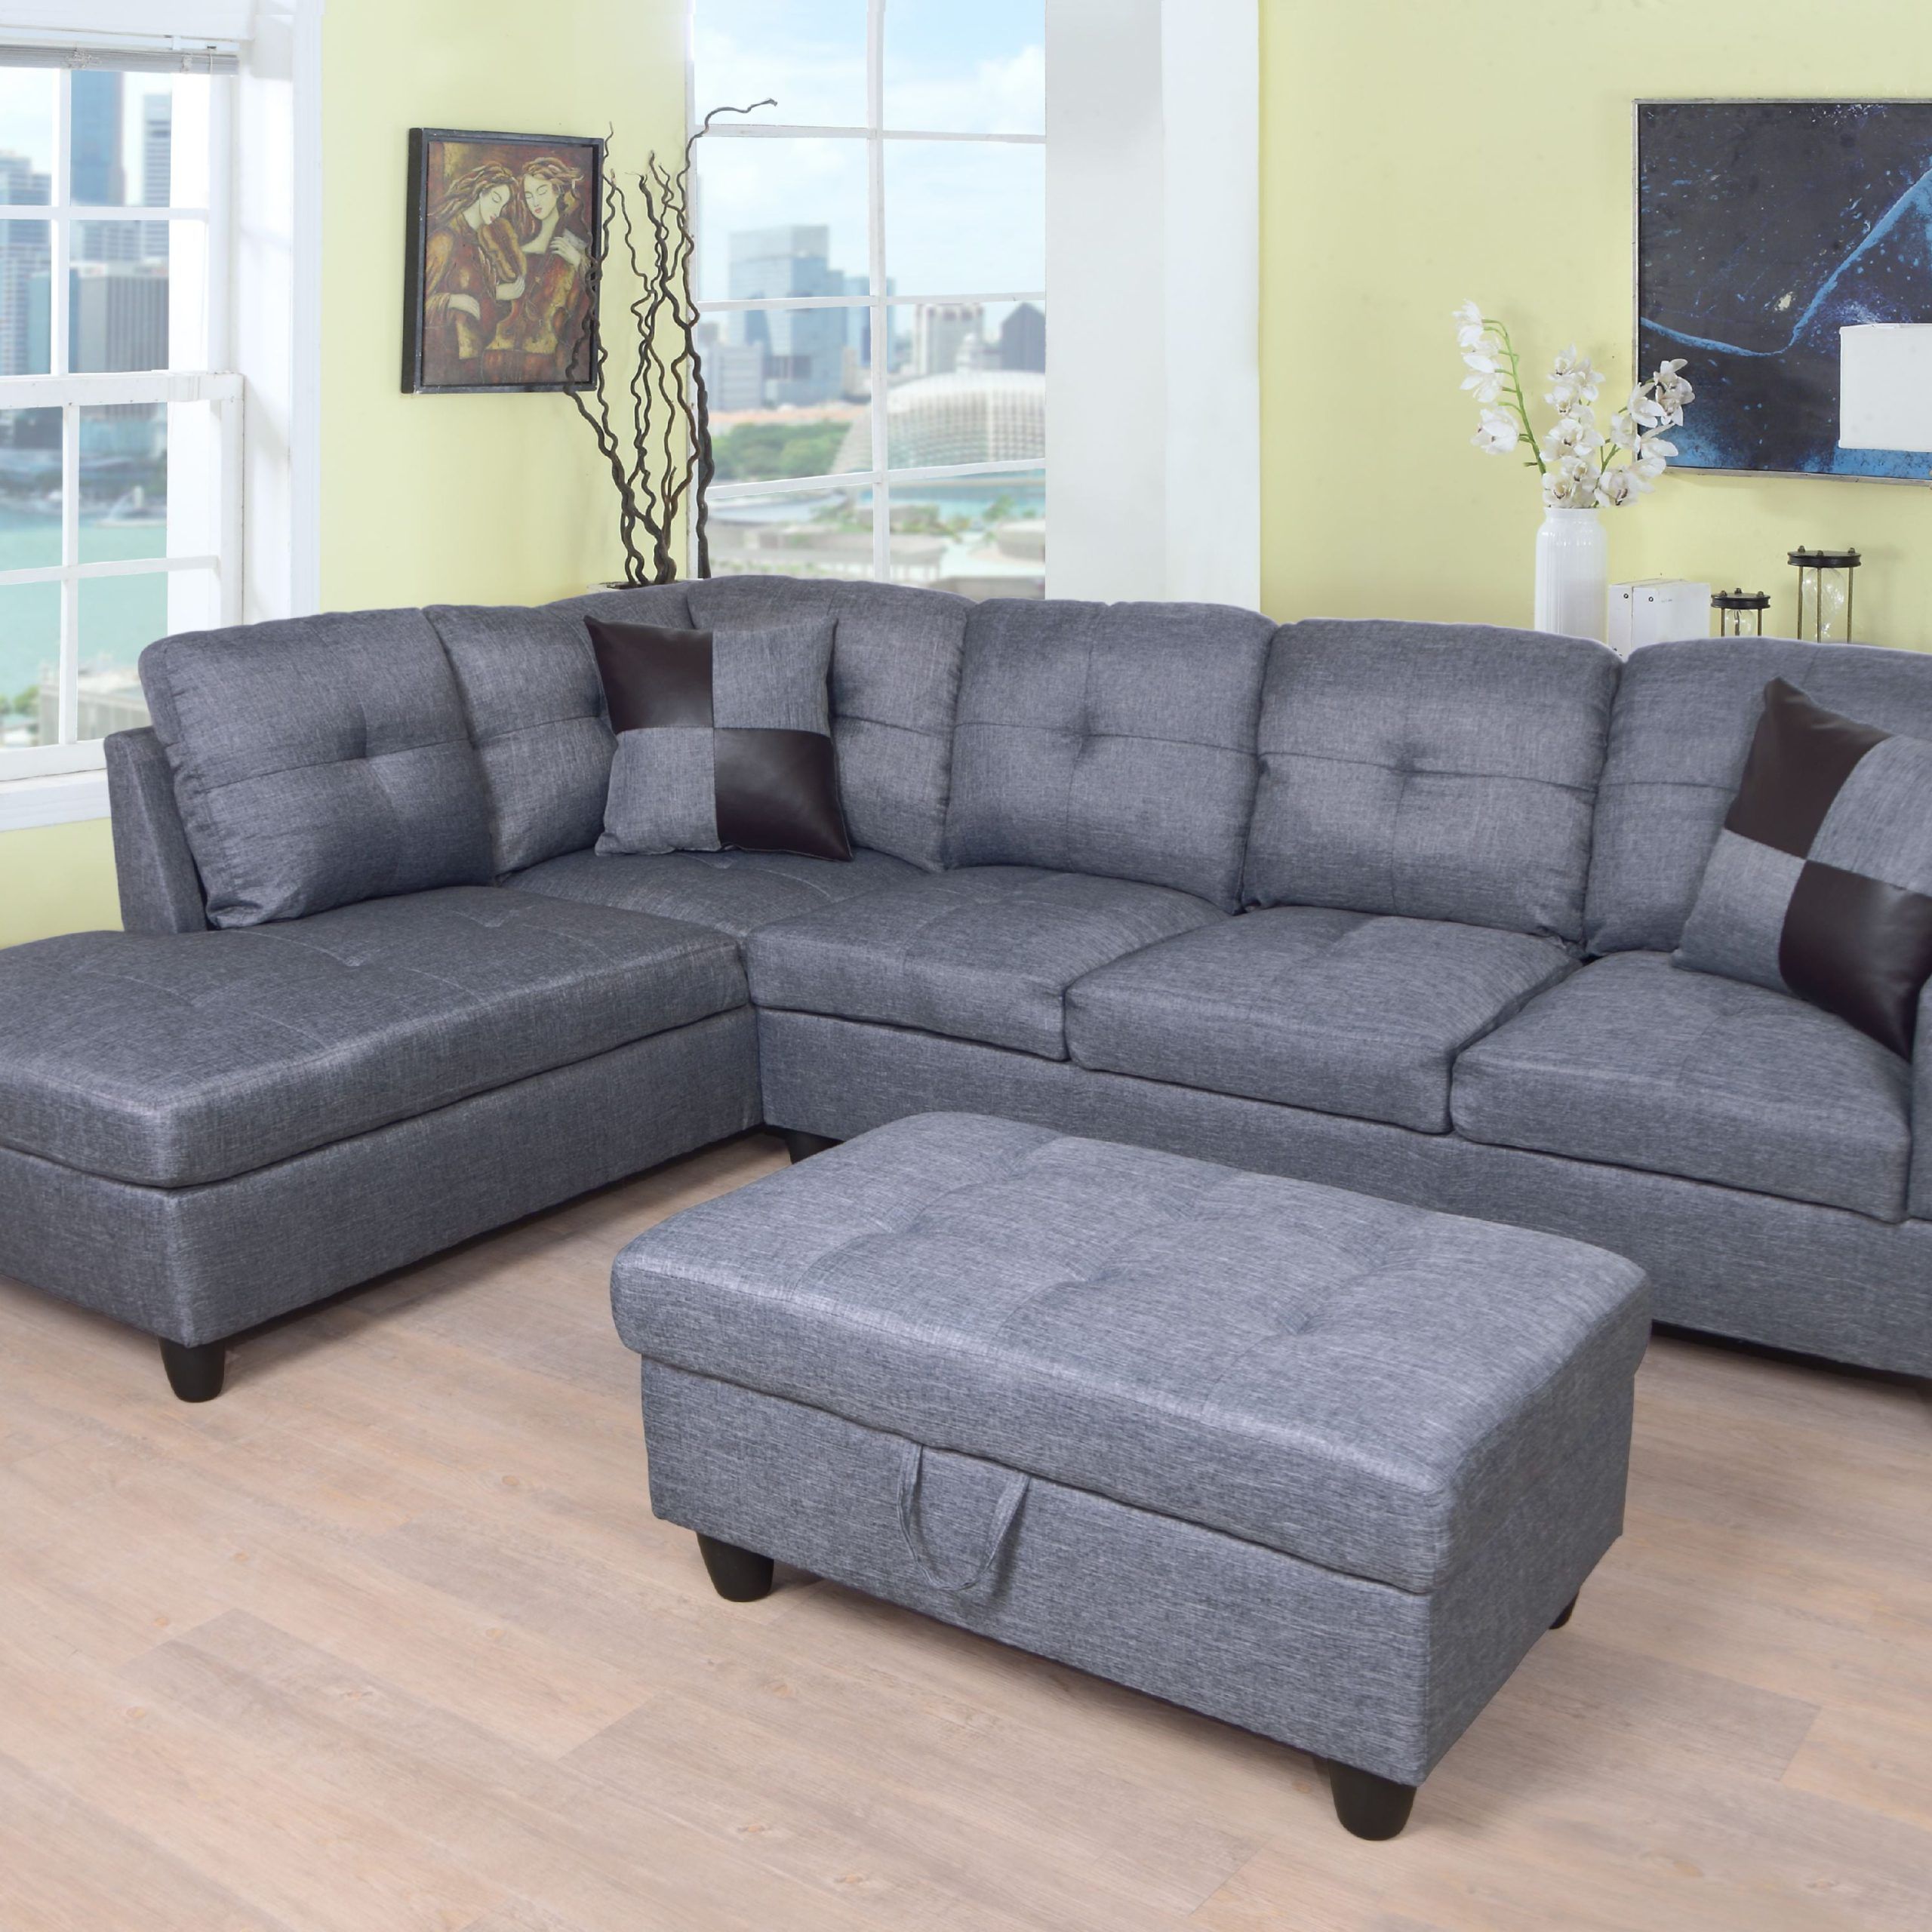 Sam Left Facing Sectional Sofa With Ottoman, Grey – Walmart Inside Sofas With Ottomans (Gallery 6 of 20)